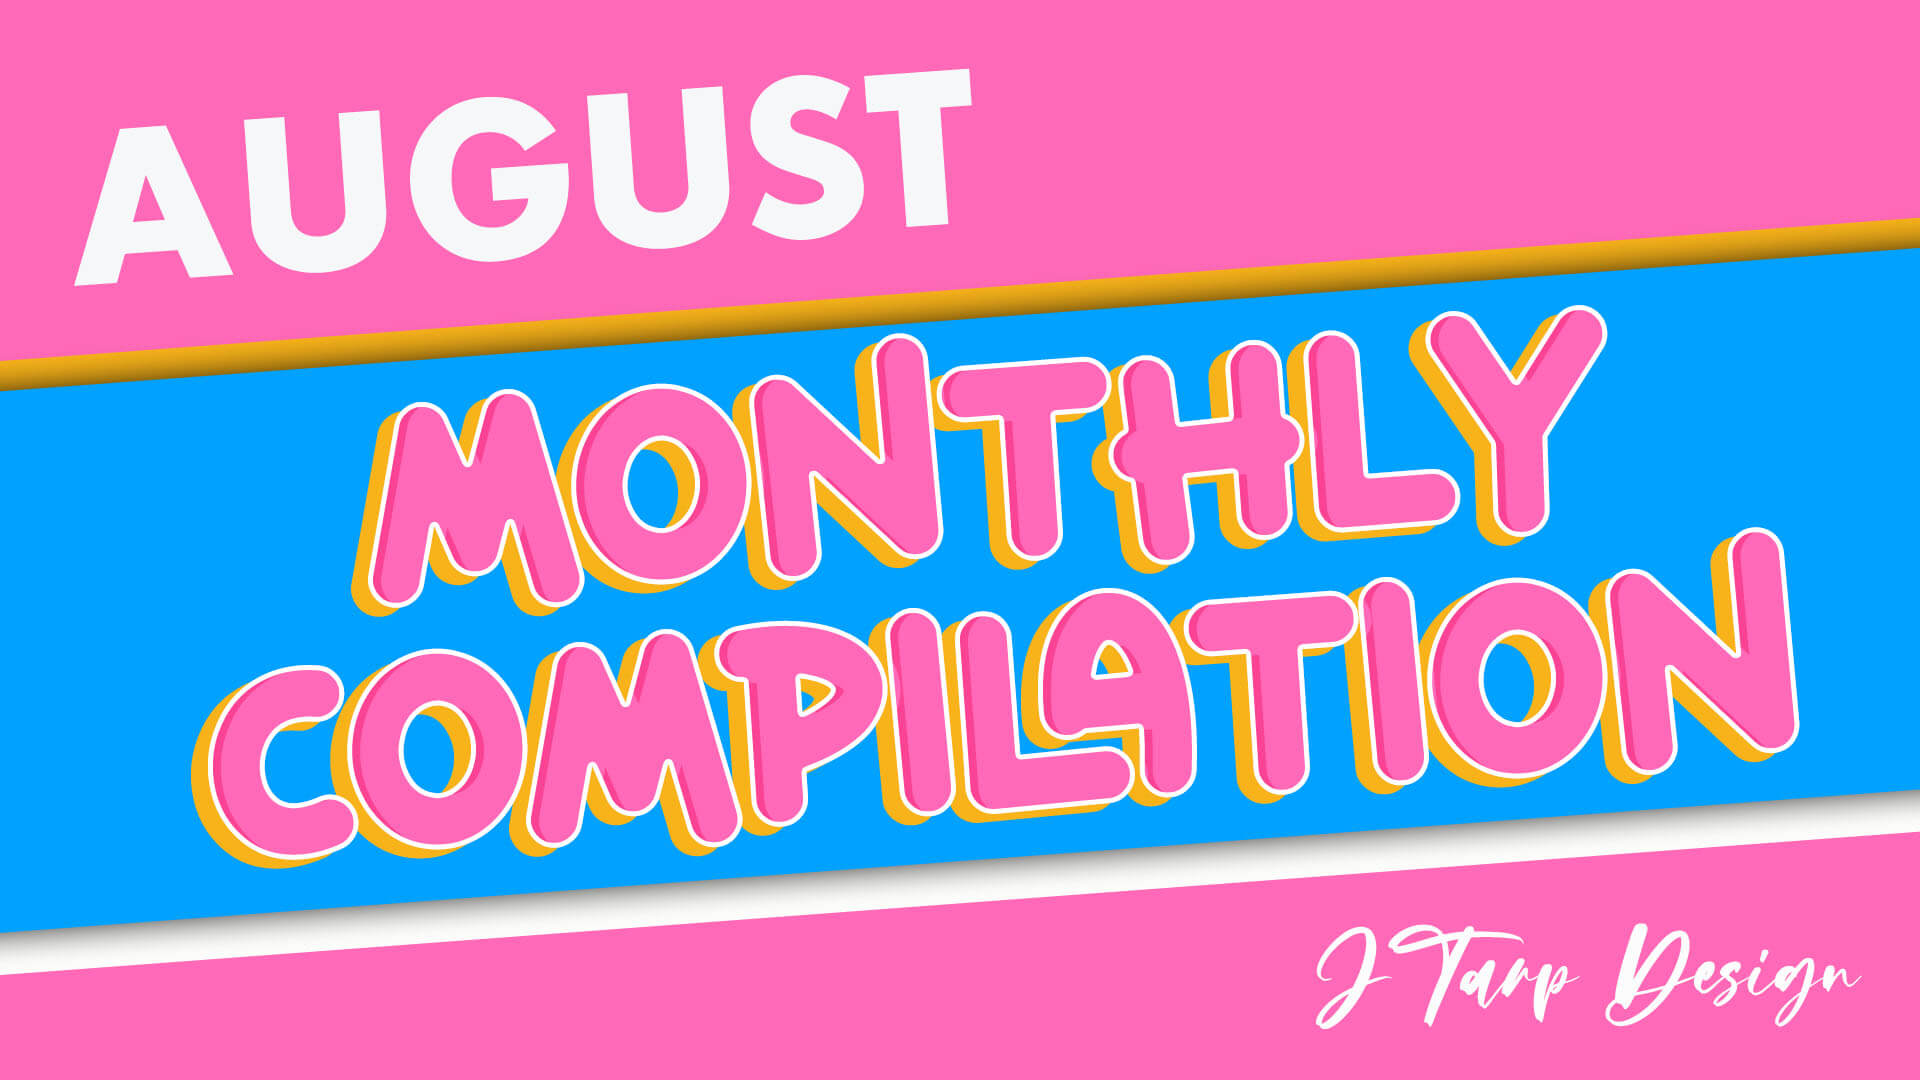 August 2022 Monthly Compilation